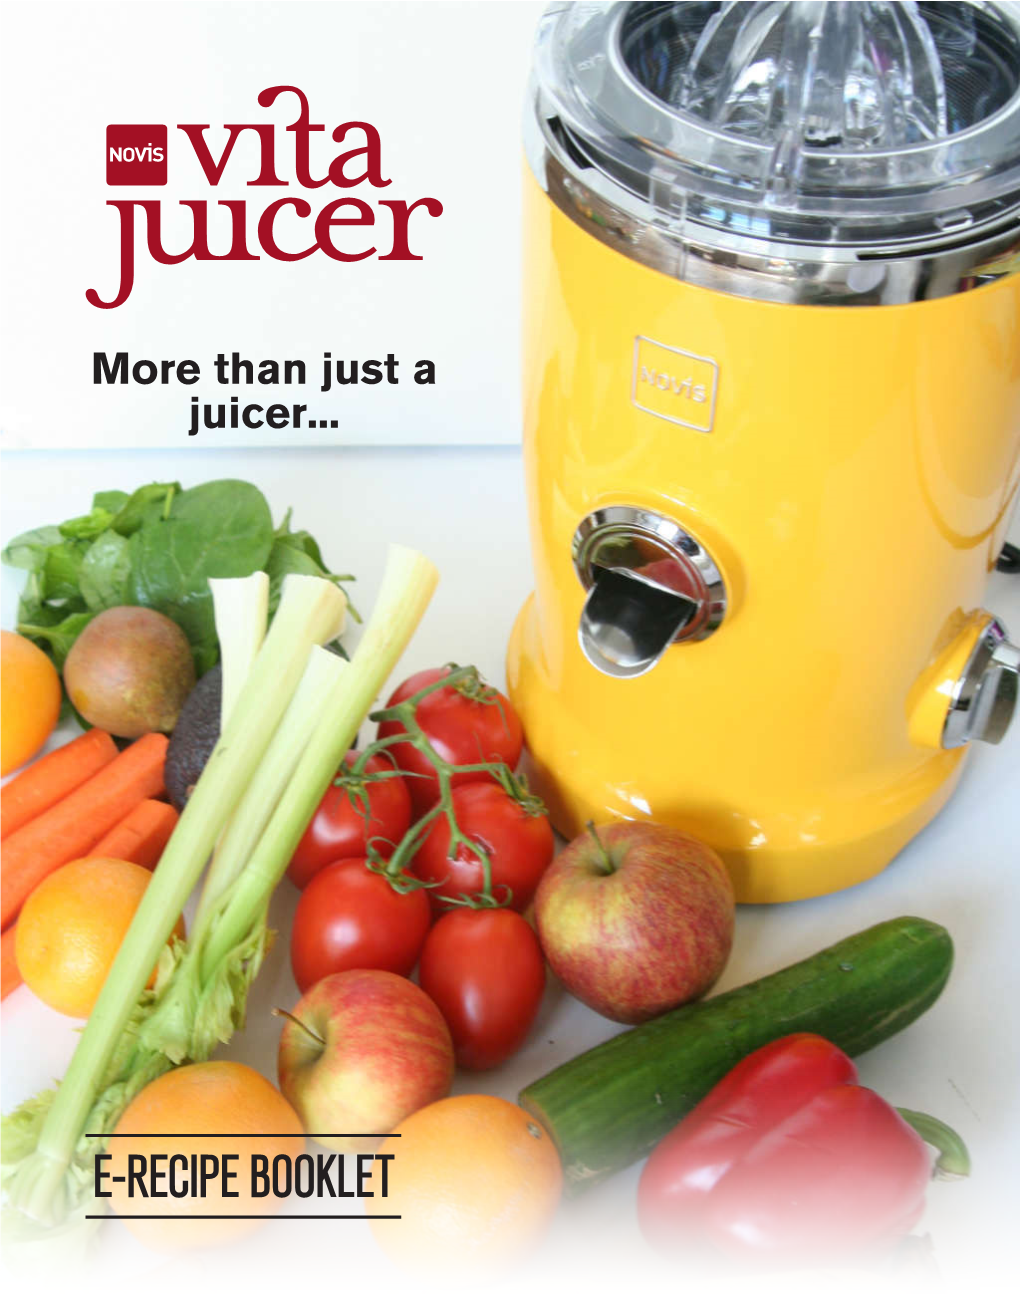 E-Recipe Booklet a World First in the Field of Multifunctional Juicers